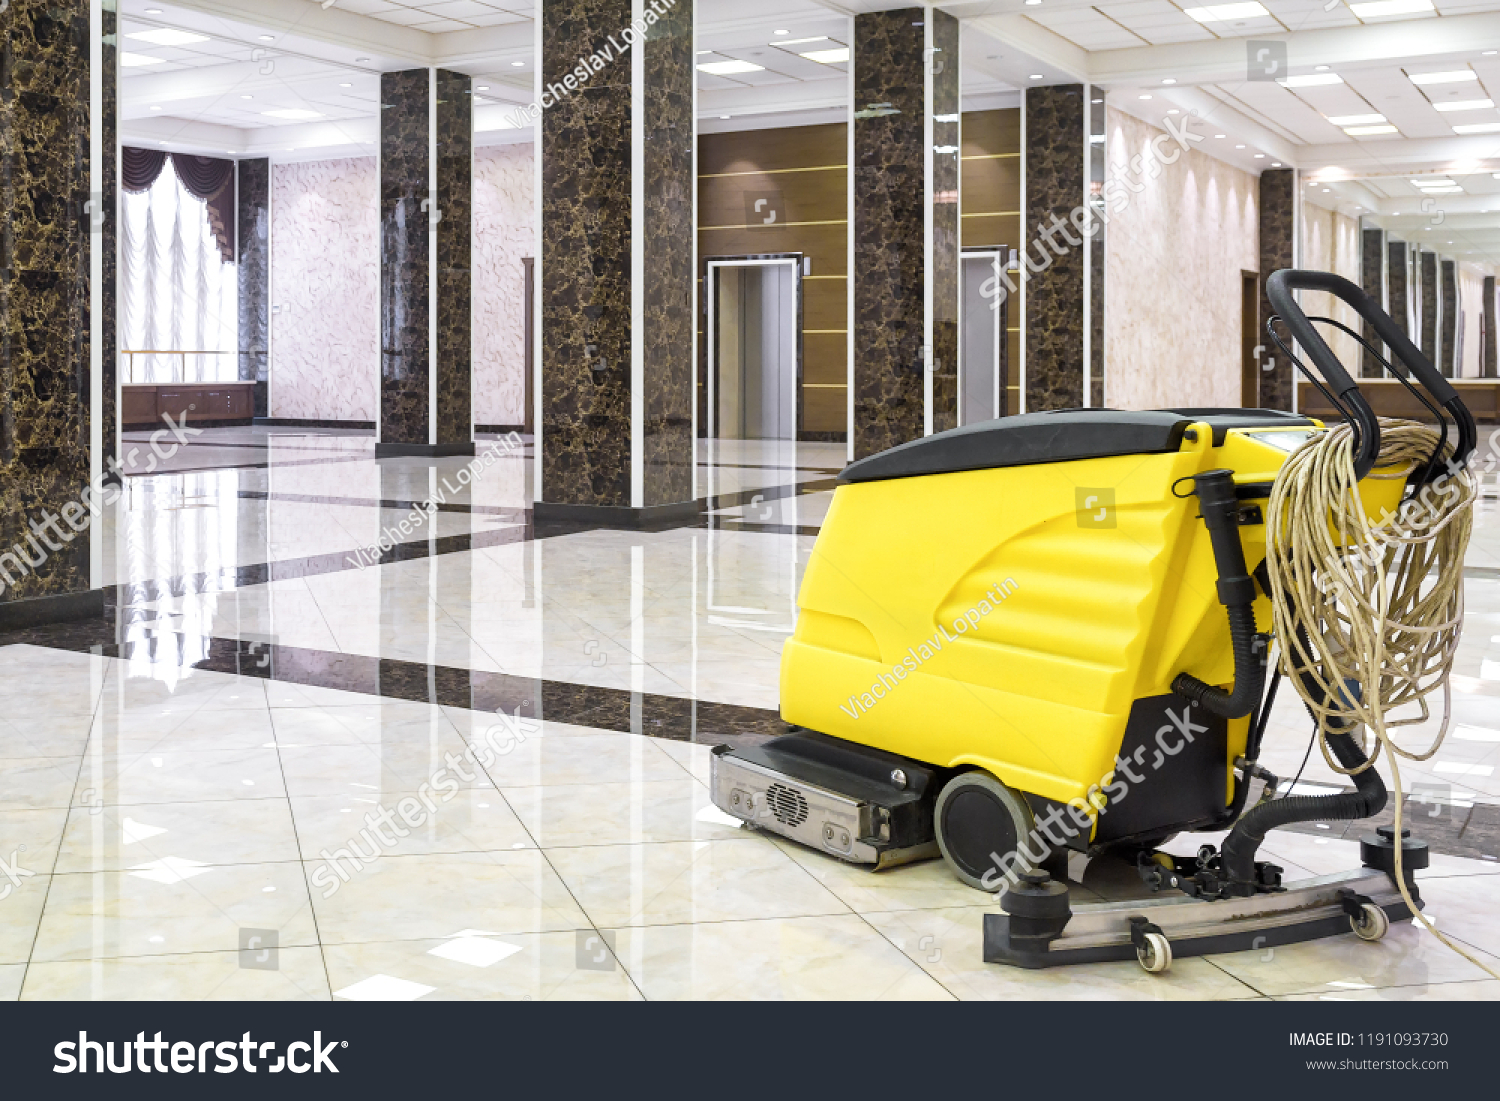 Cleaning machine in empty office lobby, yellow vacuum equipment is on clean shiny marble floor in commercial building. Concept of professional cleaning, maintenance and care service. #1191093730